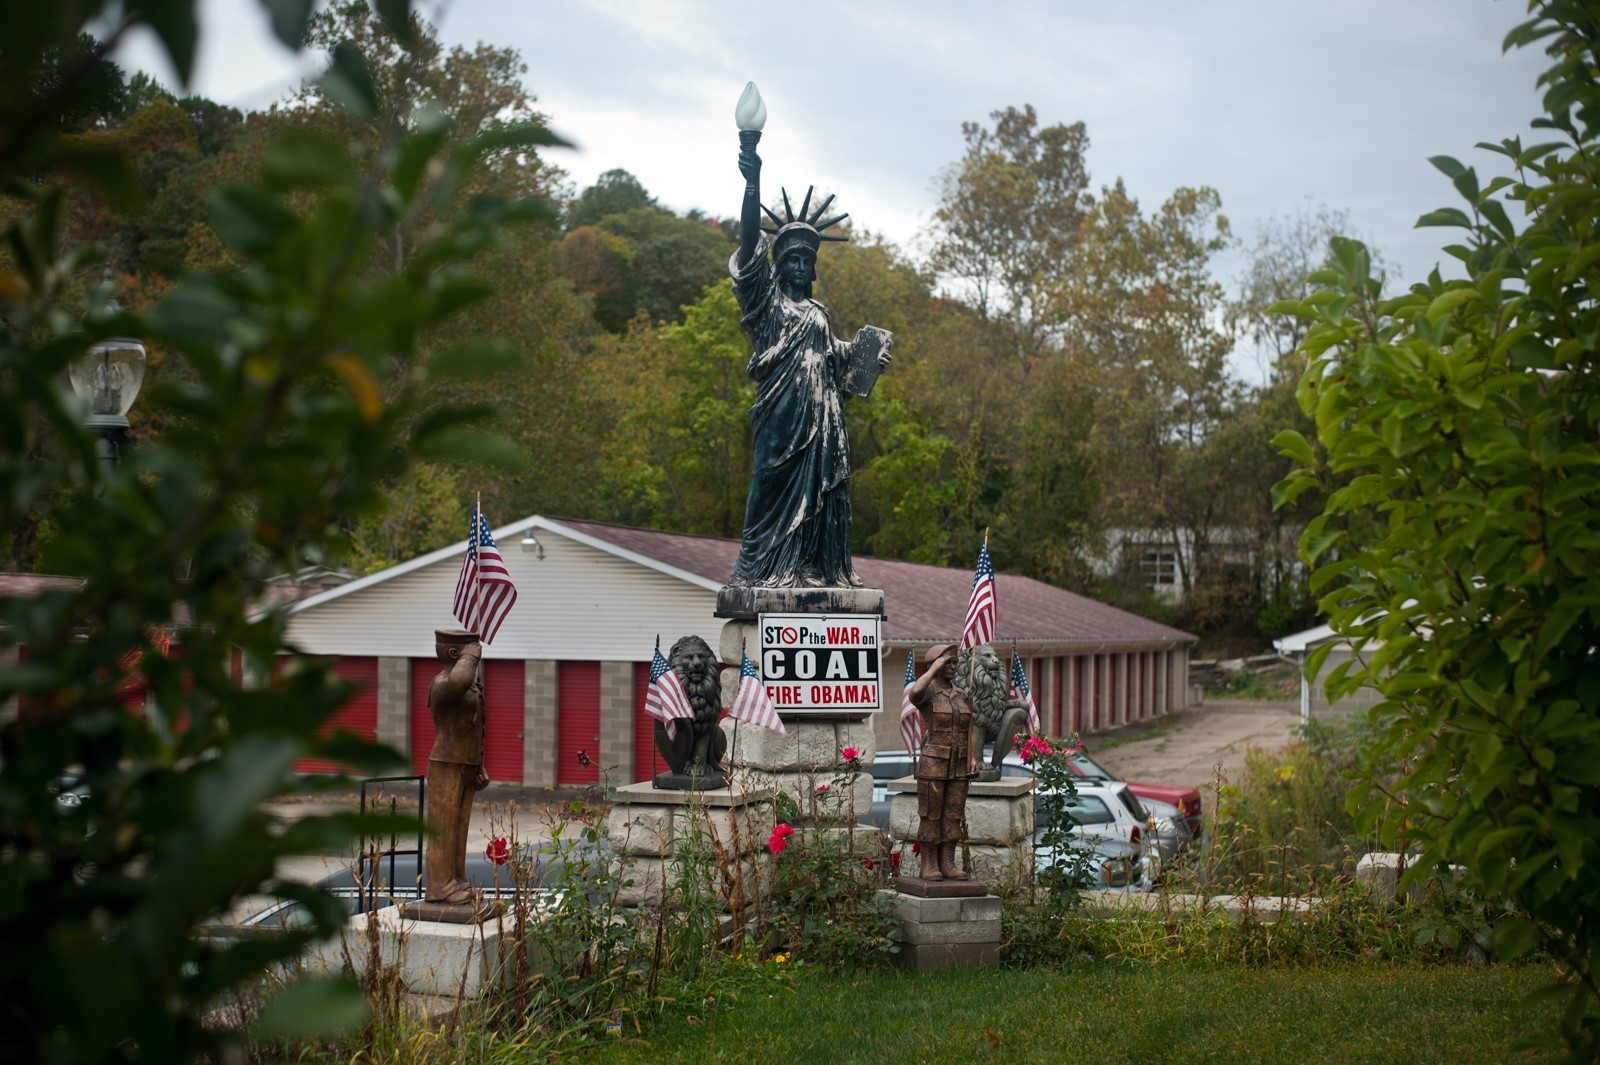 View of different little statues in a yard holding American flags.